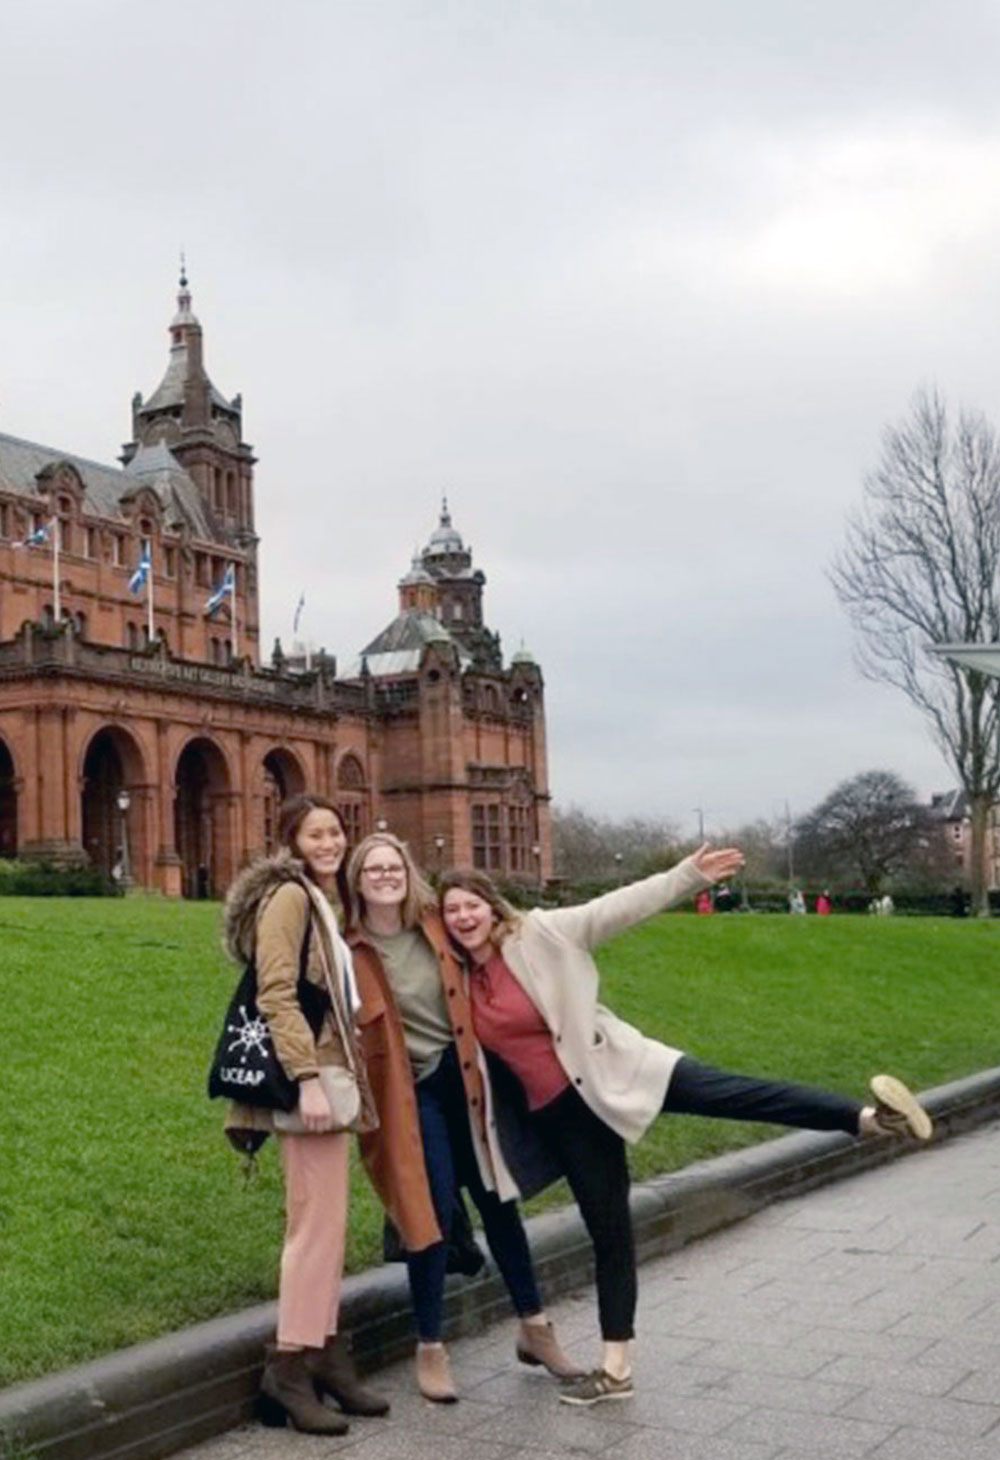 Christine Choy smiling at the camera with two friends in front of the Kelvingrove Museum, Glasgow